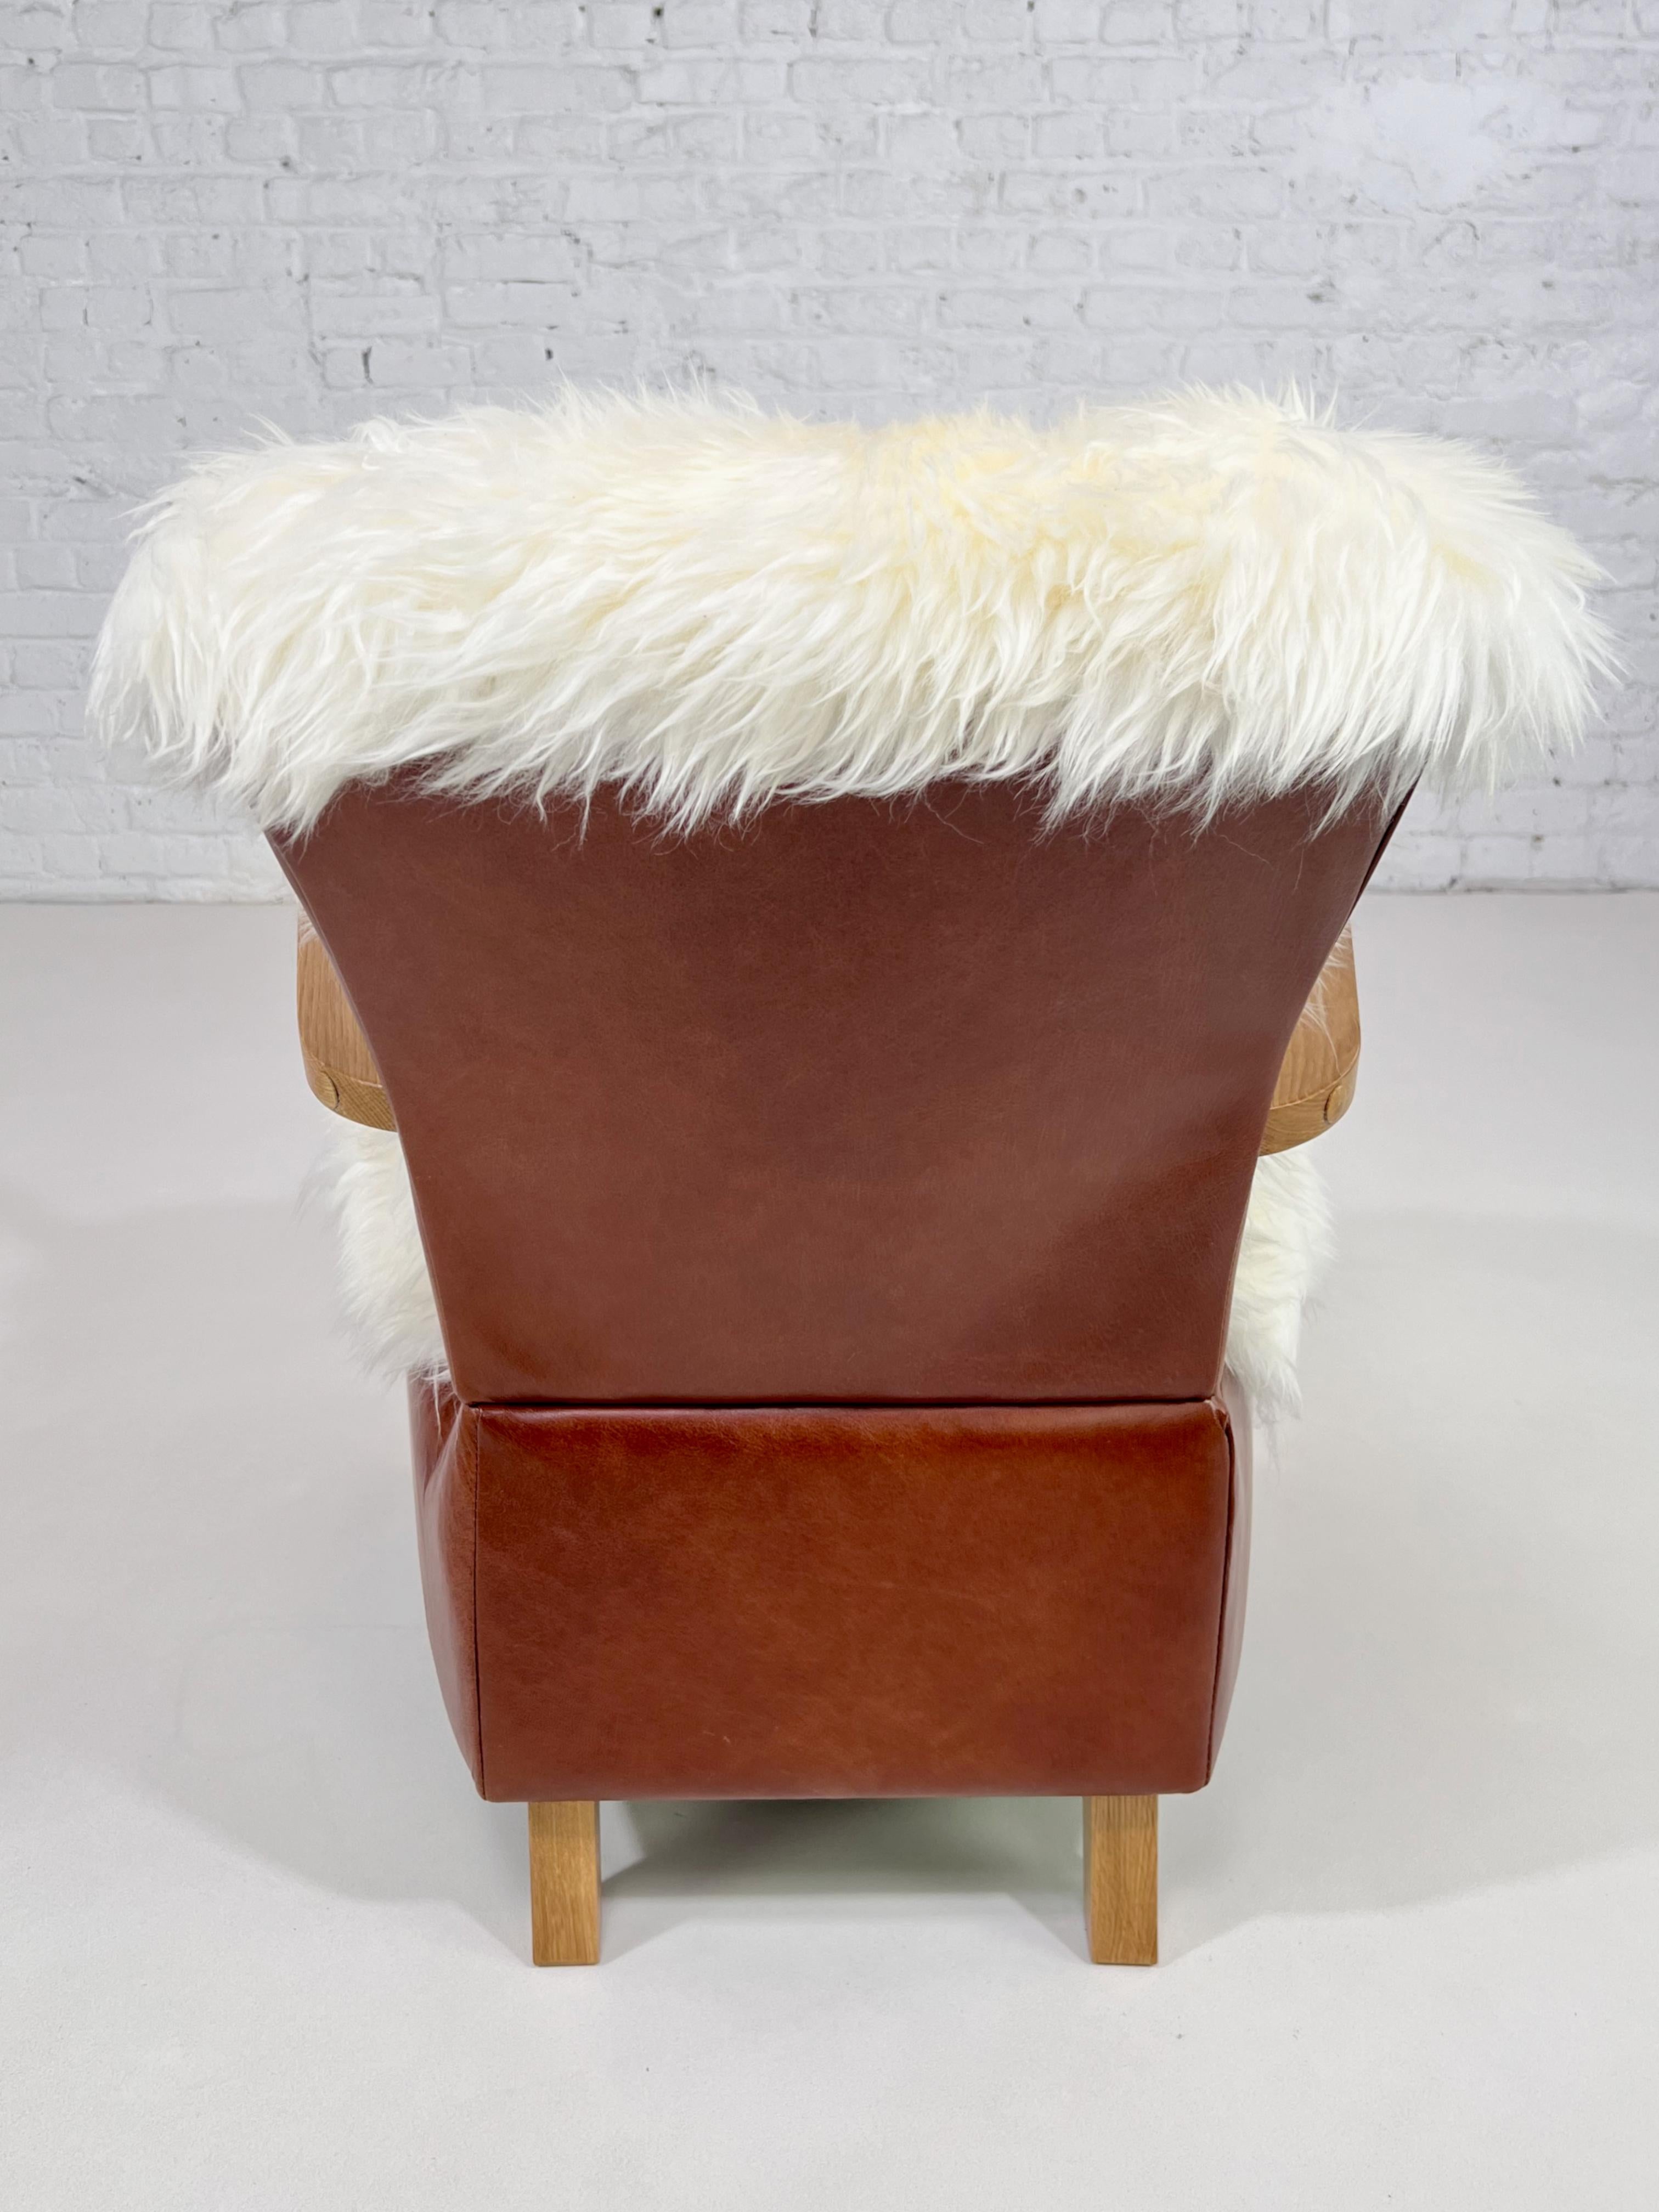 1960s MCM Design And Scandinavian Style Wooden And Cognac Leather Armchair For Sale 1